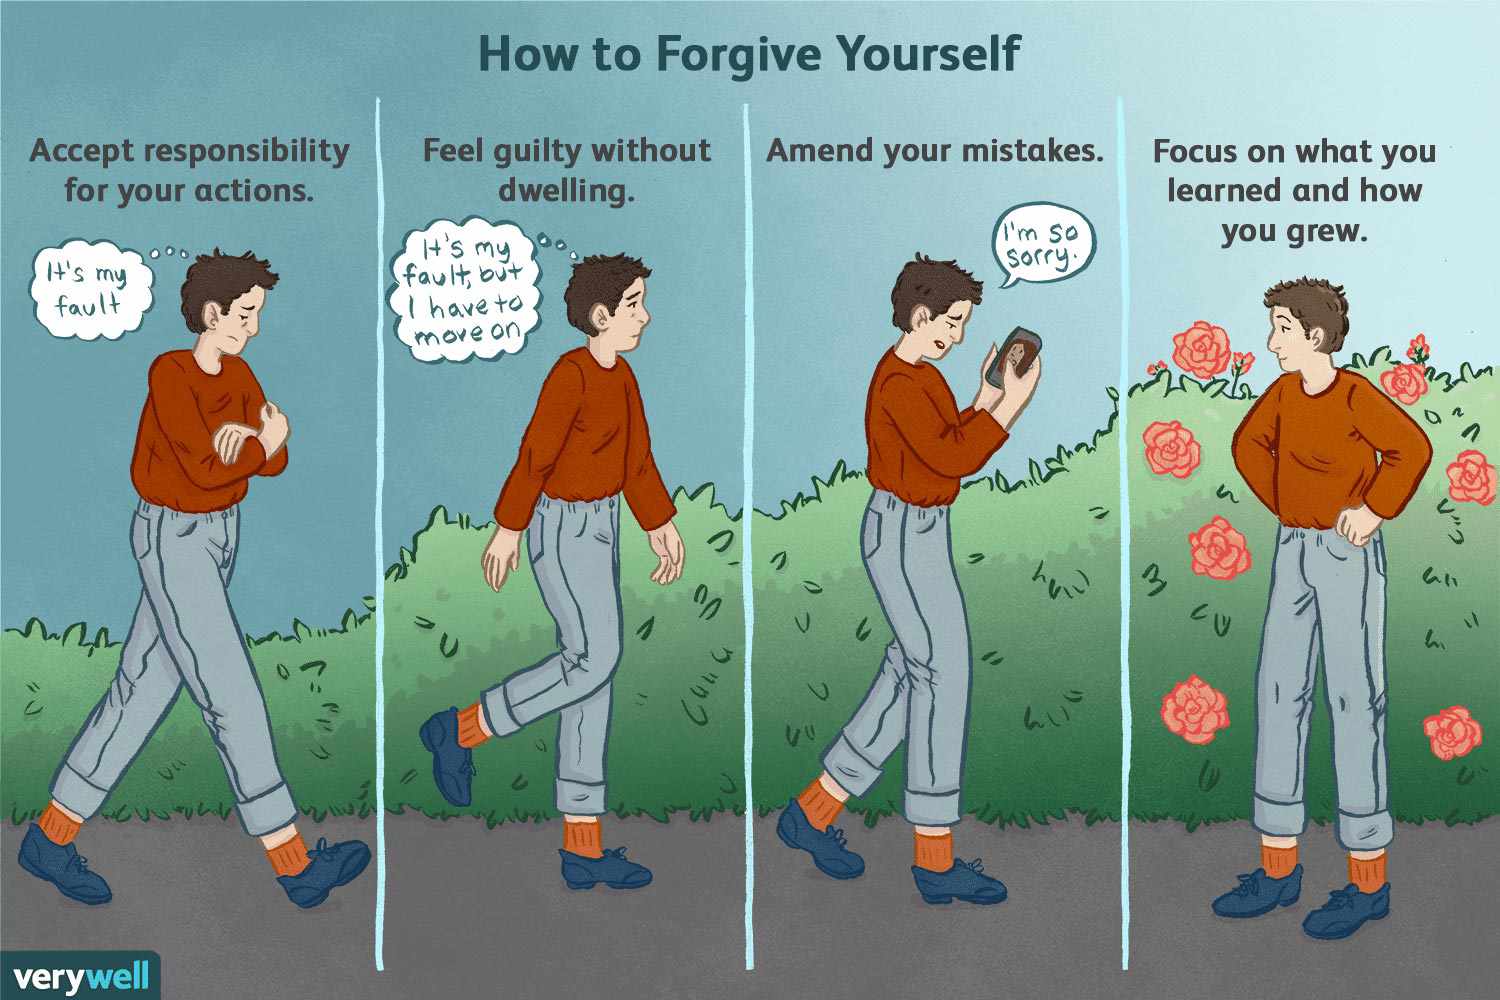 How to Forgive Yourself for Past Mistakes?